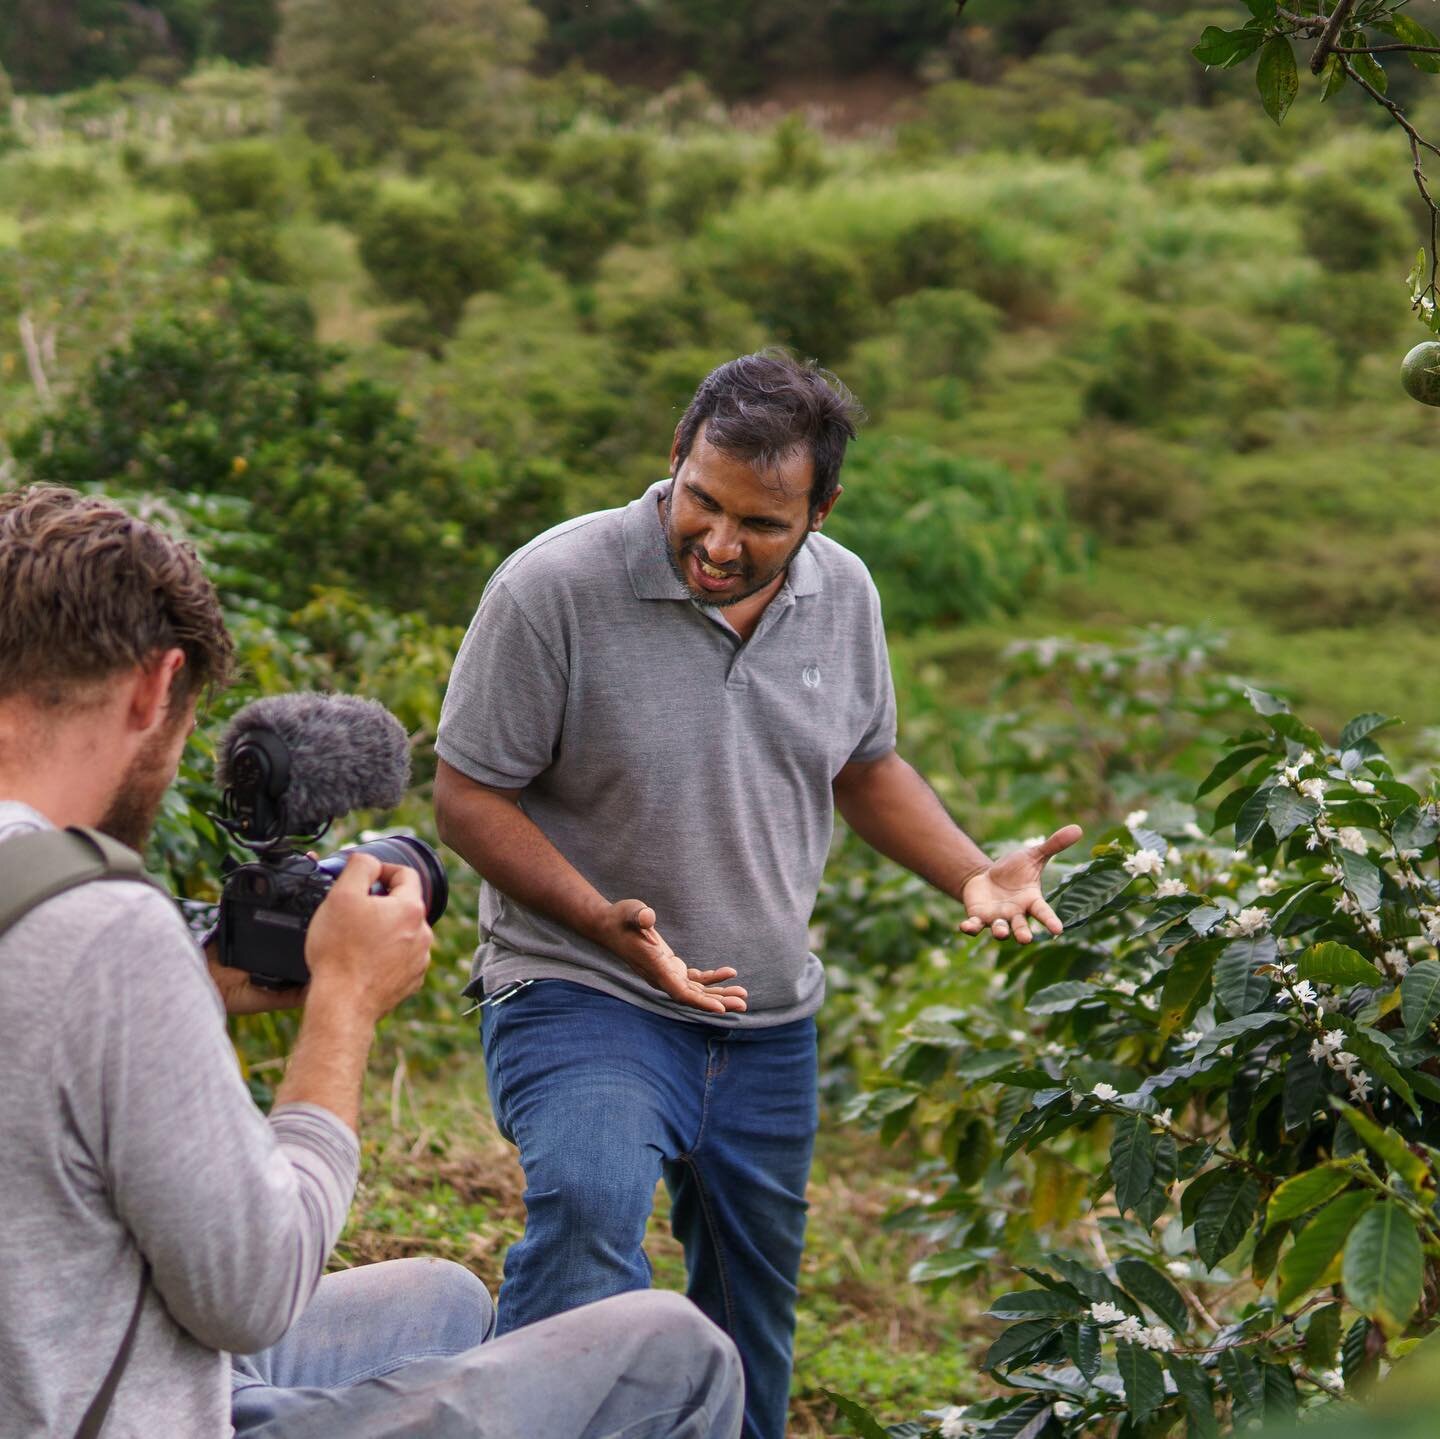 We buy all of our coffee with a handshake. No middle men. No massive corporations. Visiting coffee farms has turned into a passion of ours and we love learning from the coffee farmers about their harvest. We evaluate the coffee together and find a sp